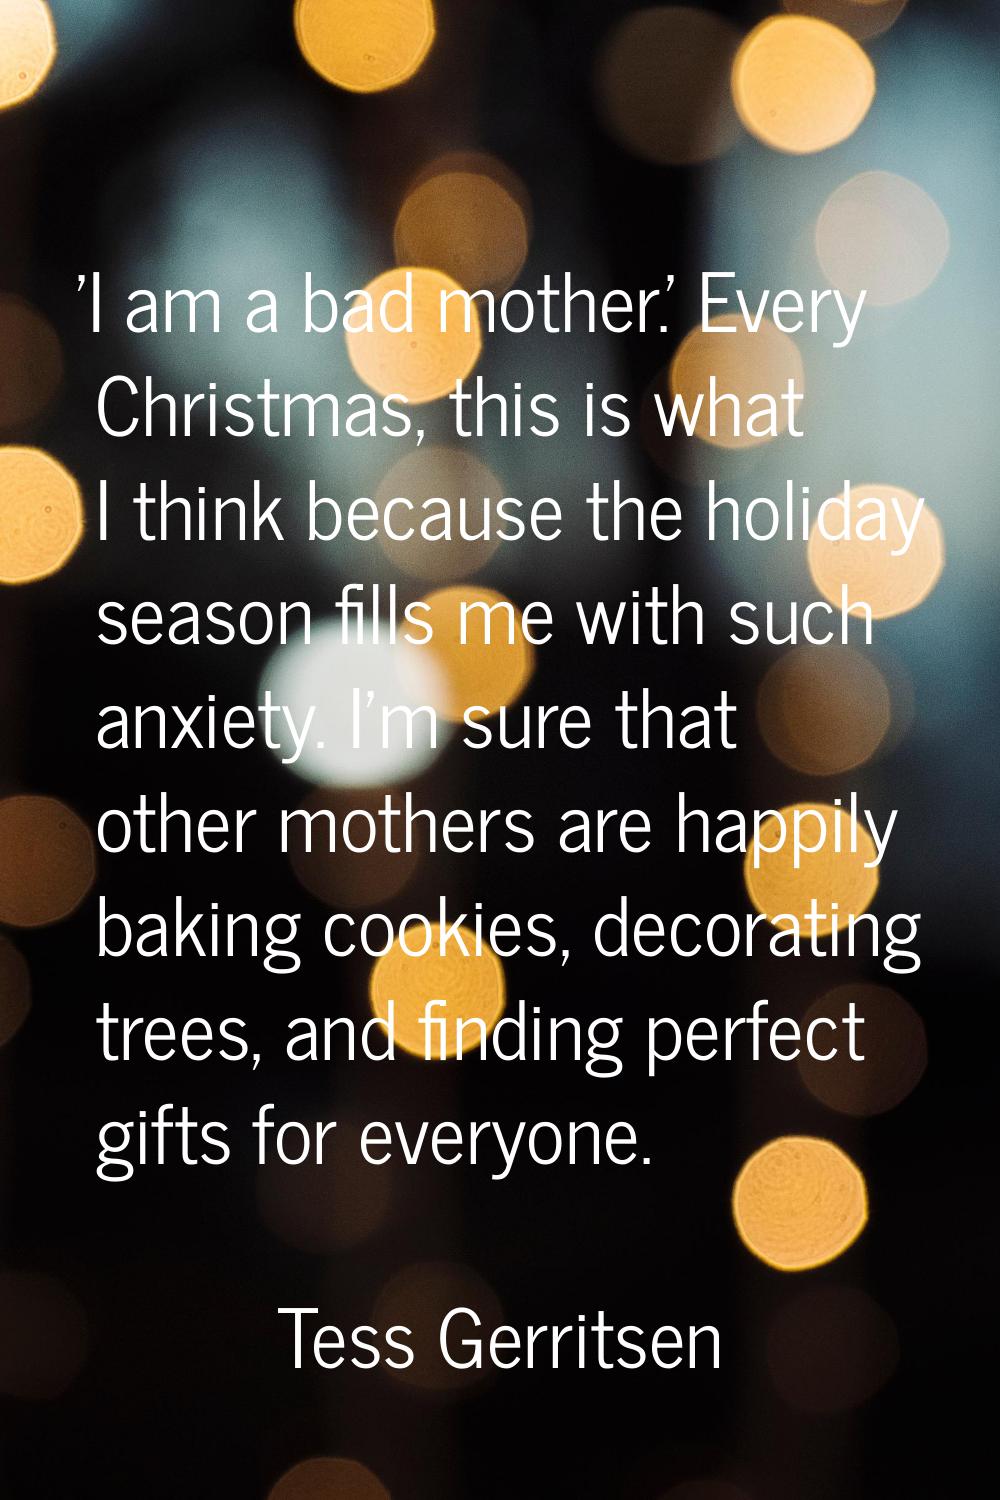 'I am a bad mother.' Every Christmas, this is what I think because the holiday season fills me with